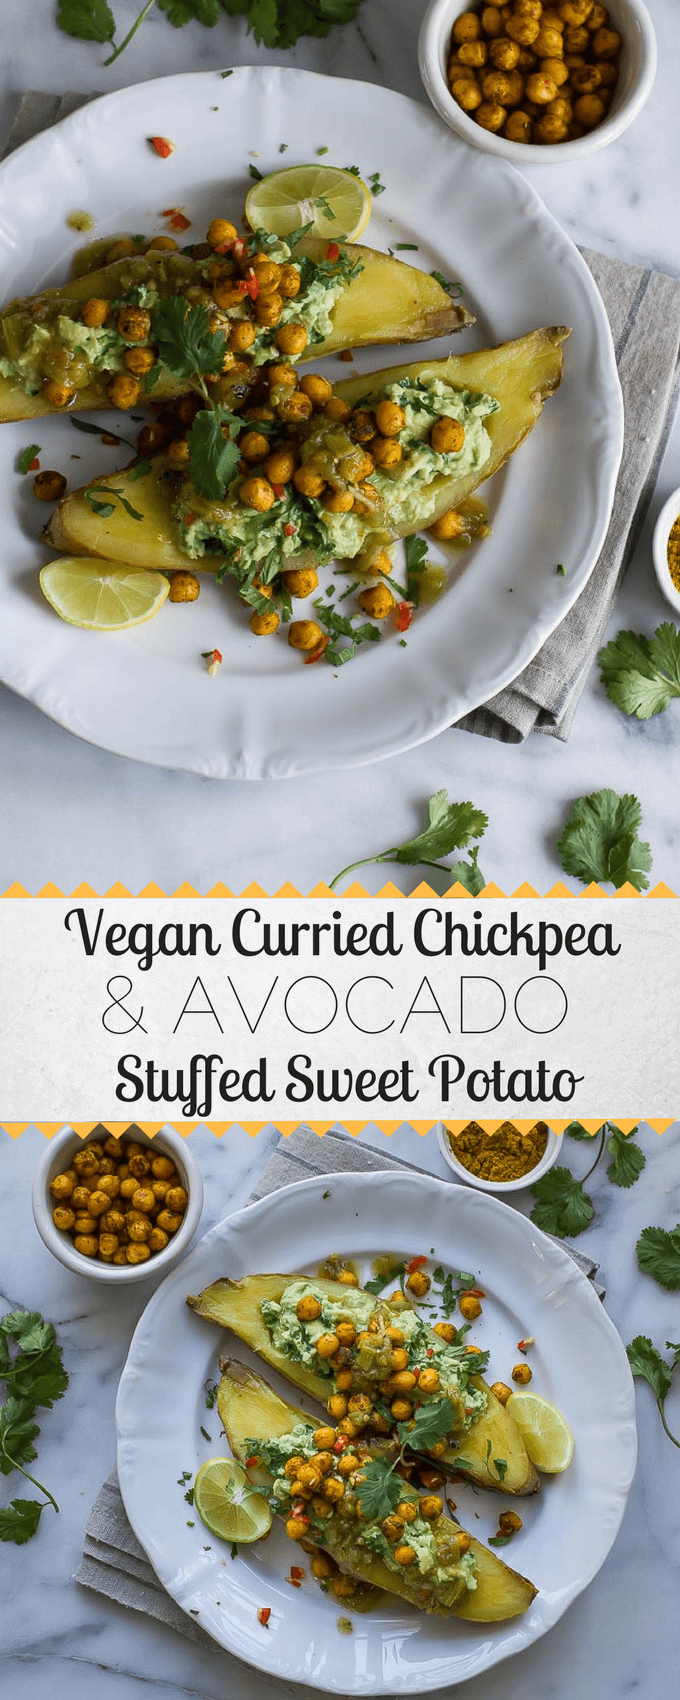 Curried Chickpea and Avocado stuffed sweet potato make an easy and super nutritious vegan supper!